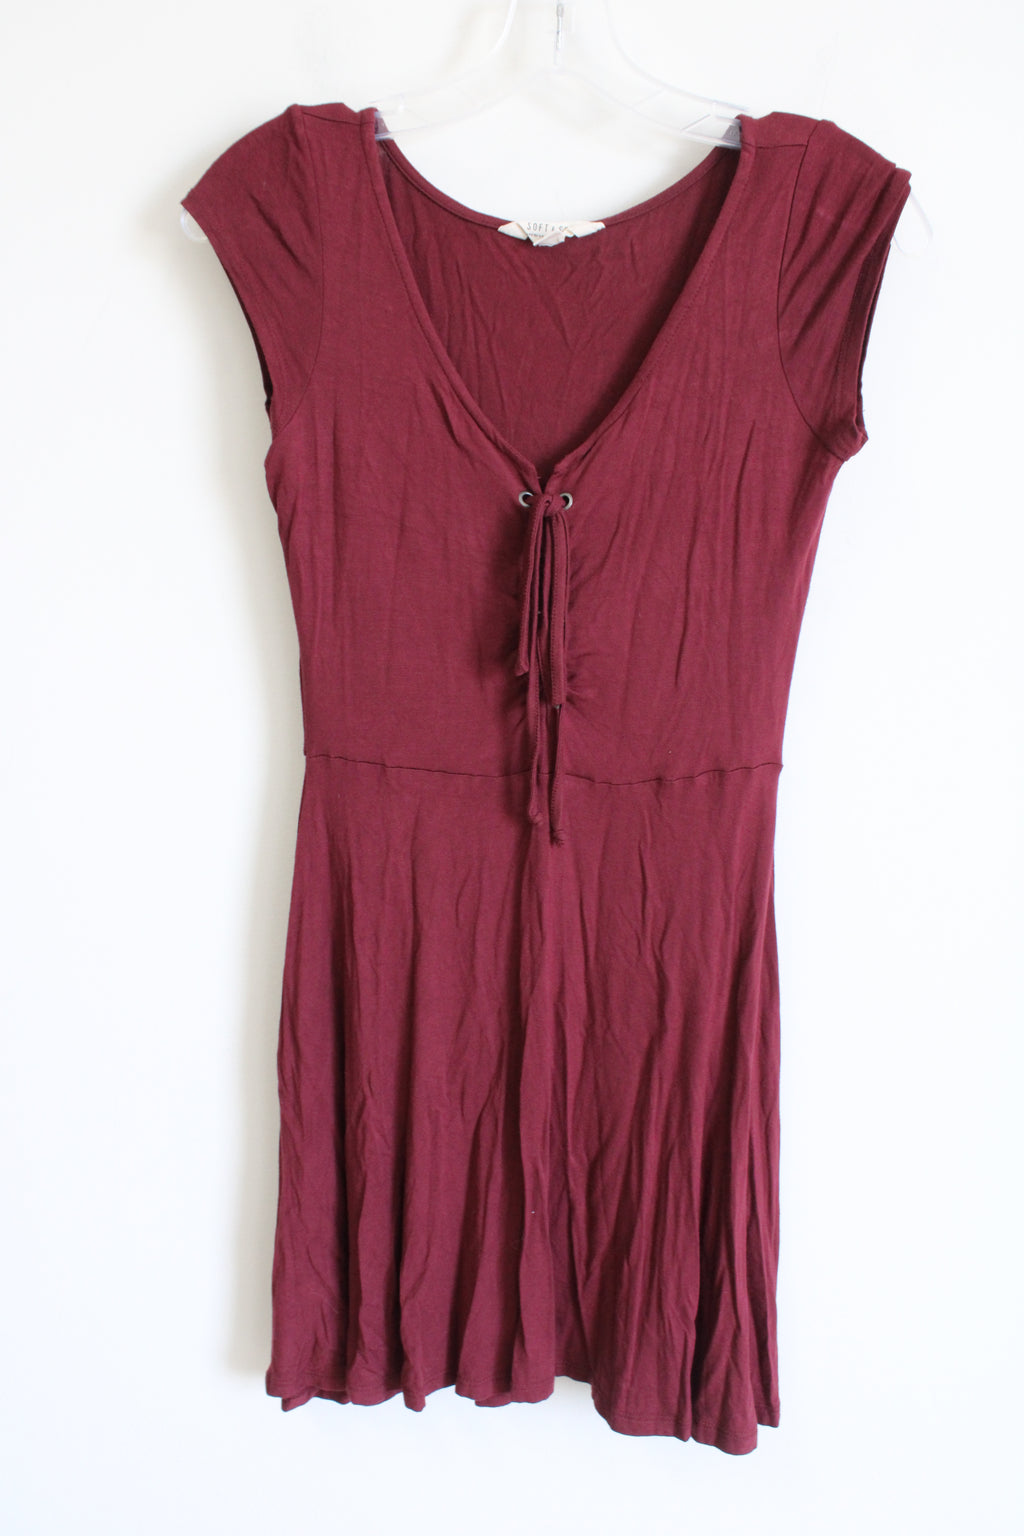 American Eagle Soft & Sexy Lace Up Burgundy Dress | S